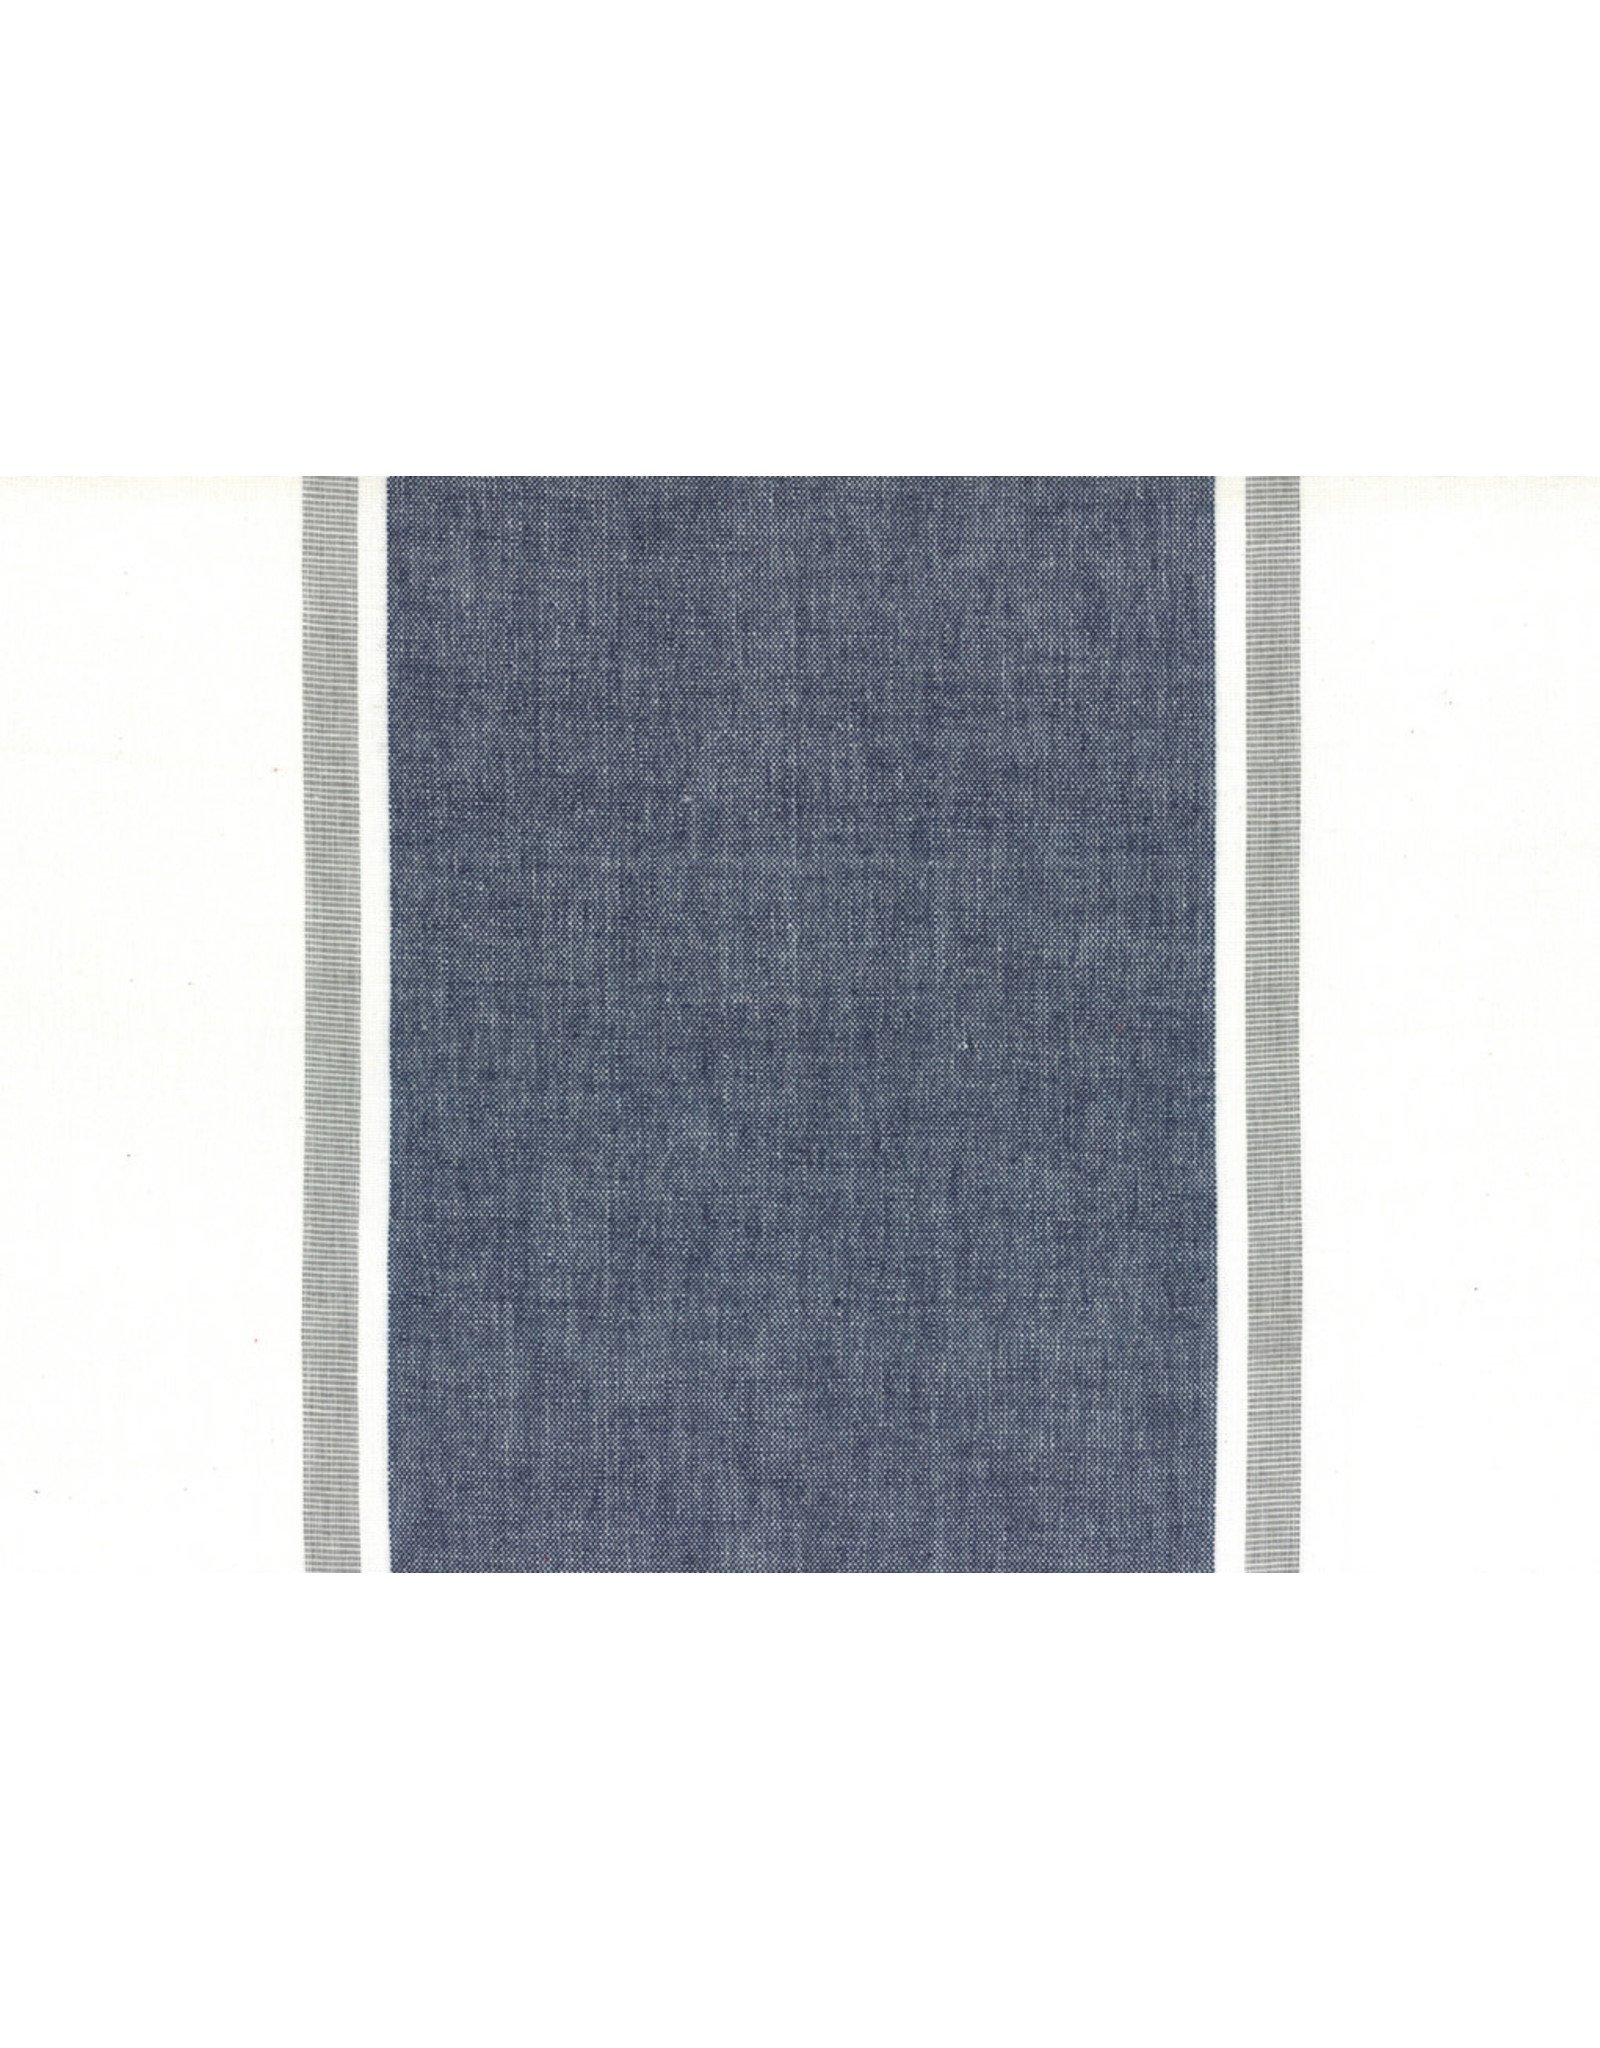 Moda Picnic Point Tea Toweling 16" wide, Navy, Sold by the Yard